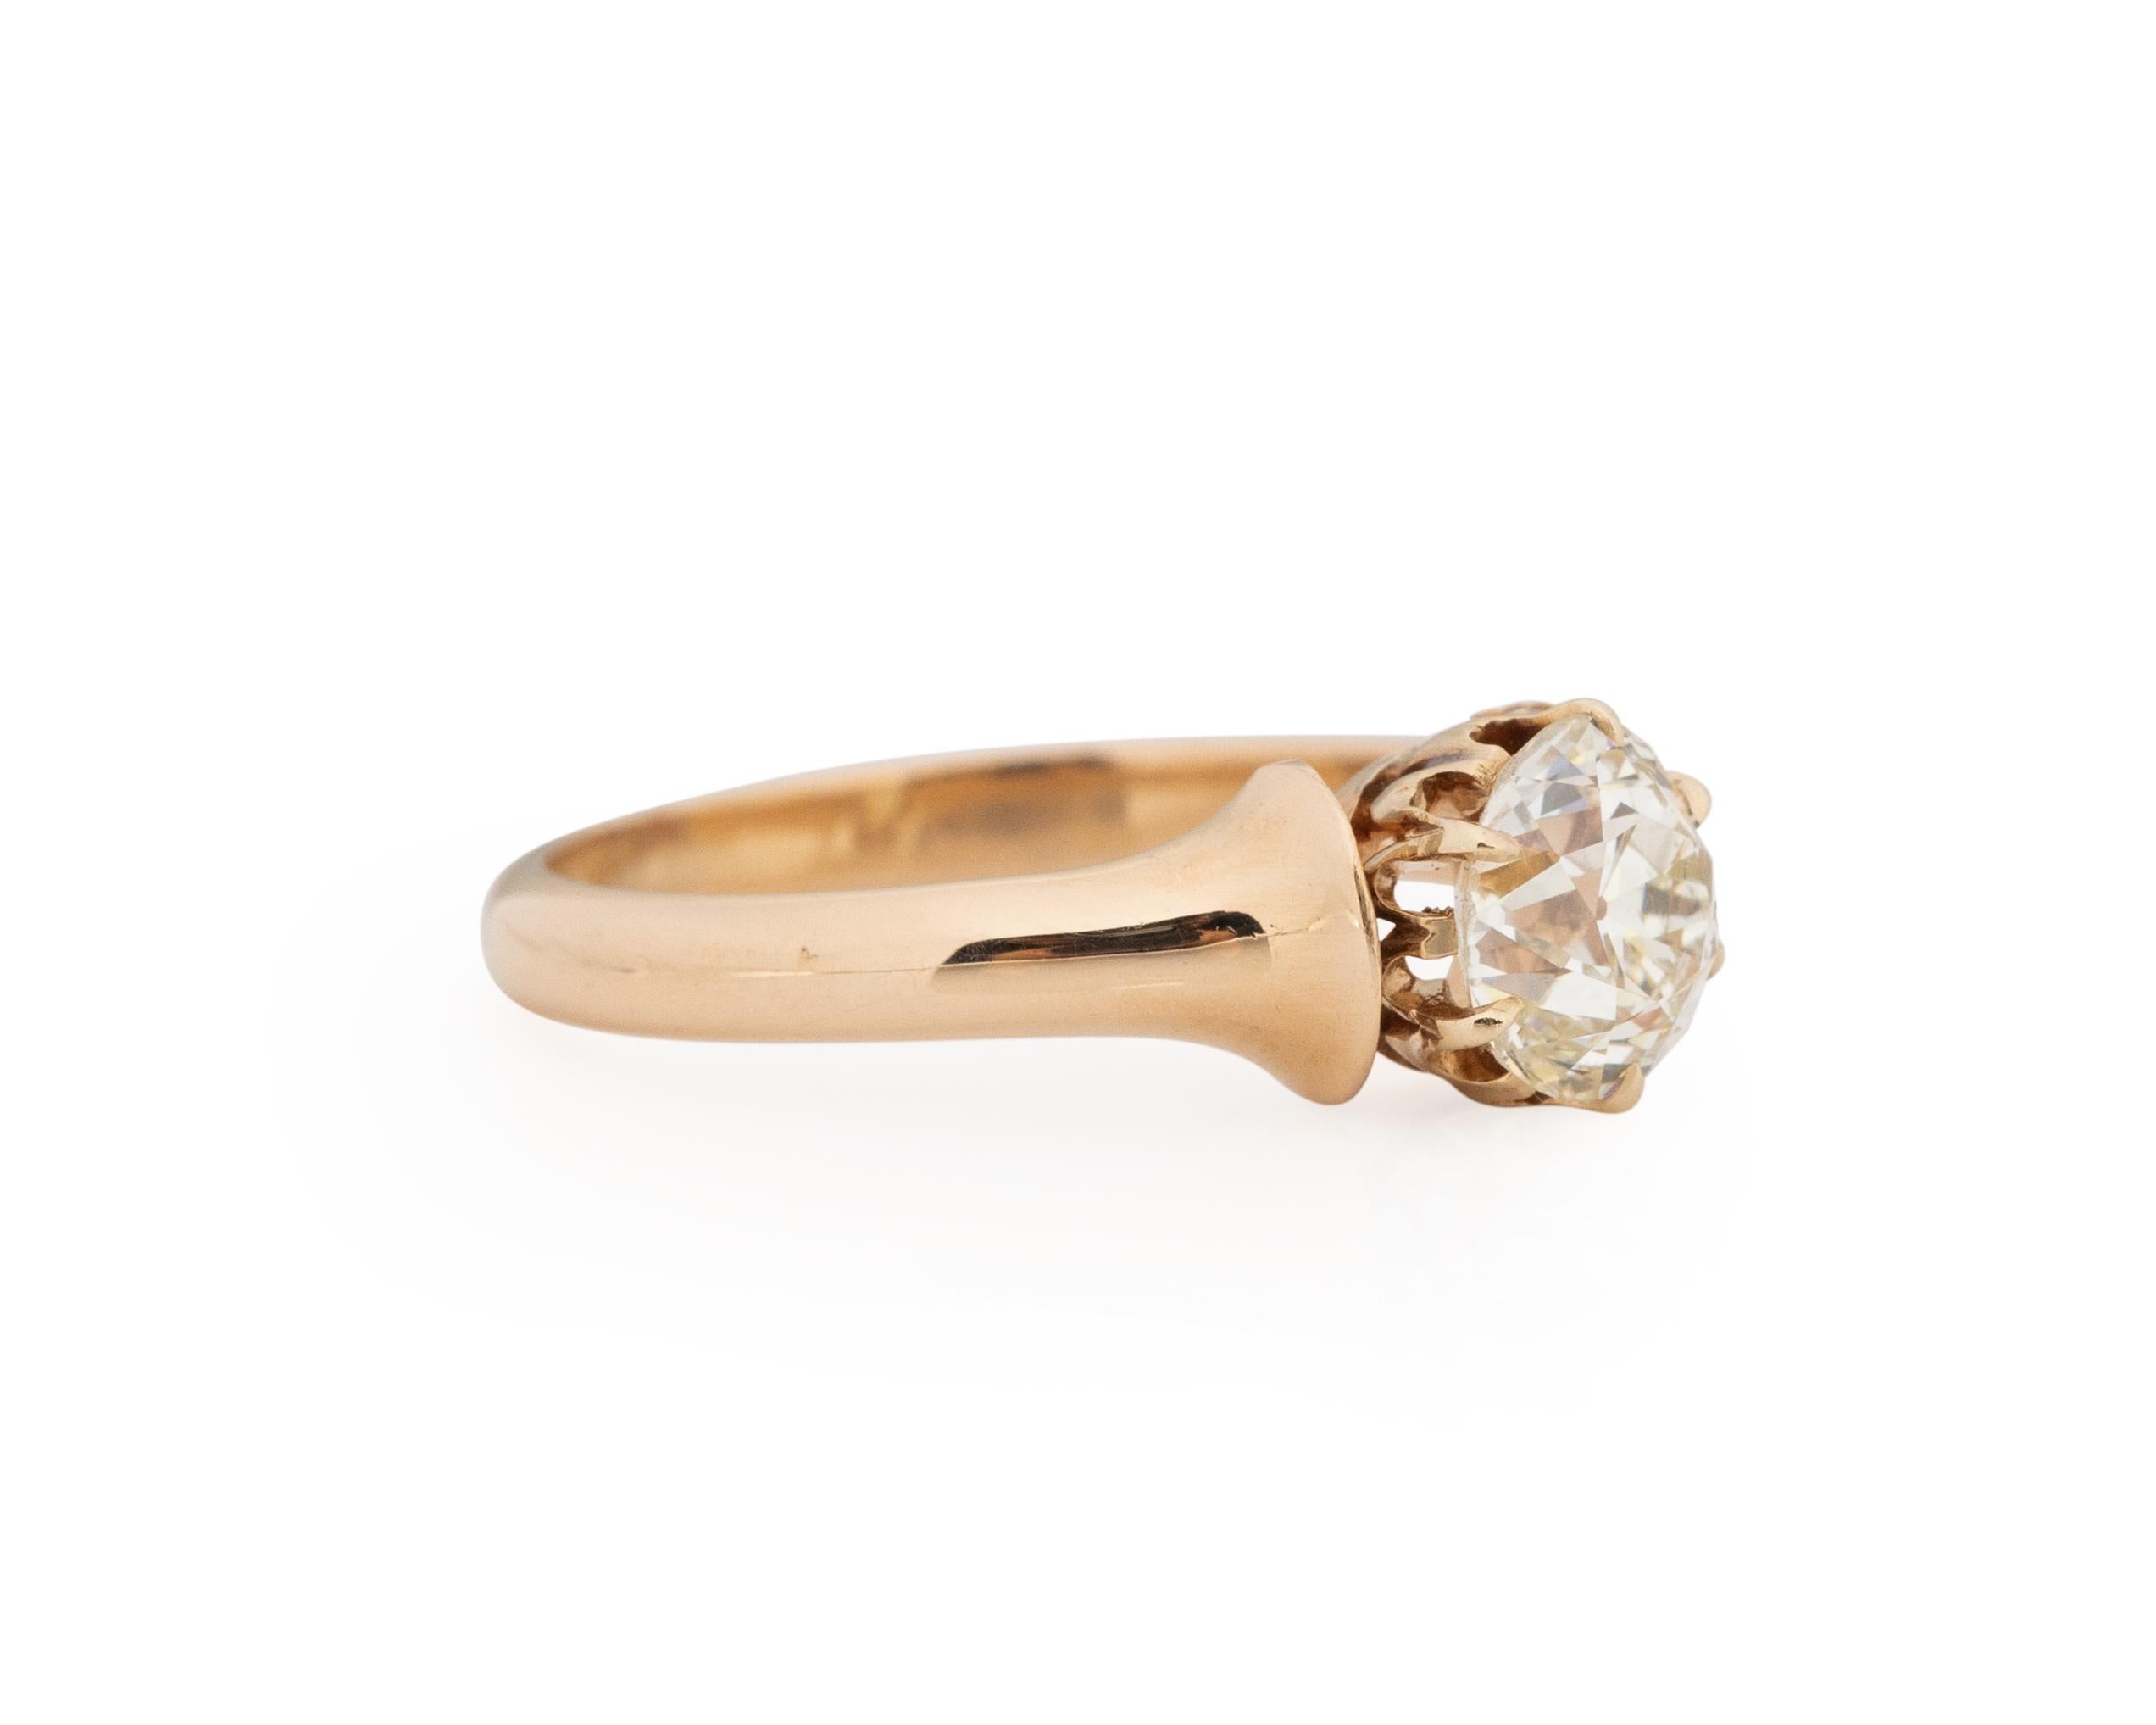 Ring Size: 6.75
Metal Type: 14Karat Yellow Gold [Hallmarked, and Tested]
Weight: 3.0 grams

Center Diamond Details:
GIA REPORT #: 22223071129
Weight: 1.32carat
Cut: Old European brilliant
Color: M
Clarity: VS1
Measurements: 6.91mm x 6.70mm x